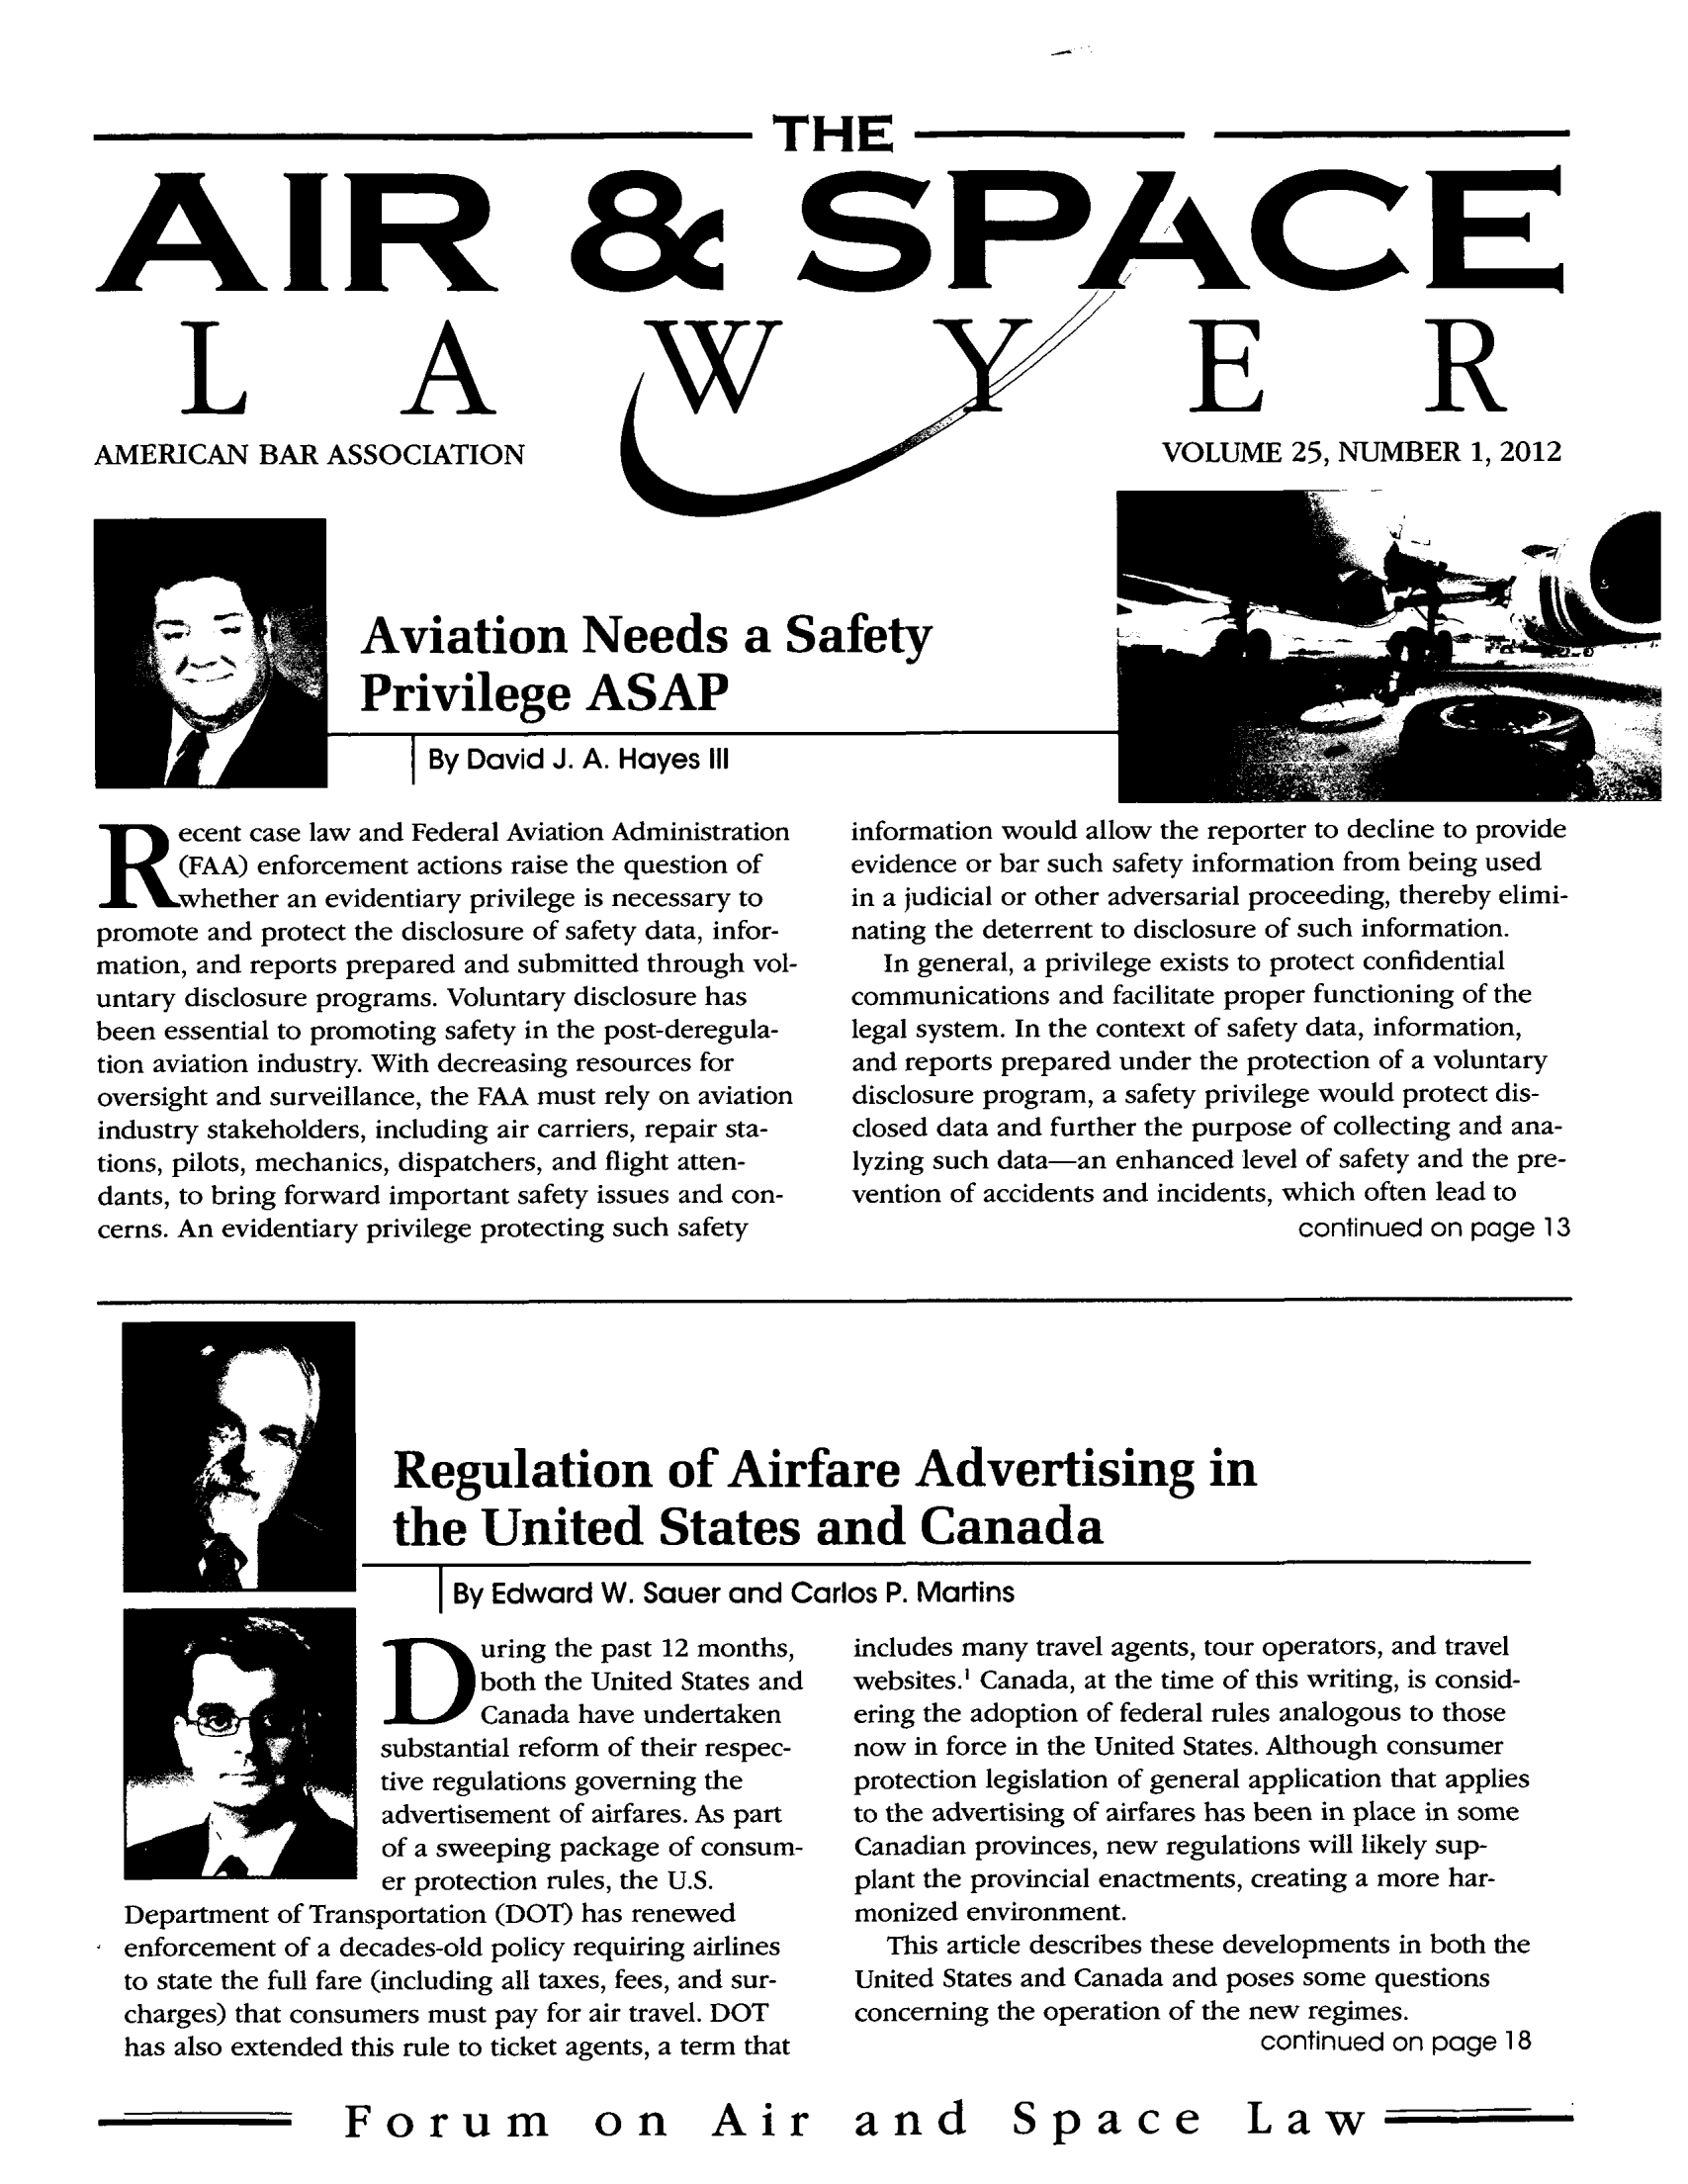 handle is hein.journals/airspaclaw25 and id is 1 raw text is: IR

L

_A

AMERICAN BAR ASSOCIATION

THE
EER
VOLUME 25, NUMBER 1, 2012

Aviation Needs a Safety
Privilege ASAP
I By David J. A. Hayes III

ecent case law and Federal Aviation Administration
(FAA) enforcement actions raise the question of
hether an evidentiary privilege is necessary to
promote and protect the disclosure of safety data, infor-
mation, and reports prepared and submitted through vol-
untary disclosure programs. Voluntary disclosure has
been essential to promoting safety in the post-deregula-
tion aviation industry. With decreasing resources for
oversight and surveillance, the FAA must rely on aviation
industry stakeholders, including air carriers, repair sta-
tions, pilots, mechanics, dispatchers, and flight atten-
dants, to bring forward important safety issues and con-
cerns. An evidentiary privilege protecting such safety

information would allow the reporter to decline to provide
evidence or bar such safety information from being used
in a judicial or other adversarial proceeding, thereby elimi-
nating the deterrent to disclosure of such information.
In general, a privilege exists to protect confidential
communications and facilitate proper functioning of the
legal system. In the context of safety data, information,
and reports prepared under the protection of a voluntary
disclosure program, a safety privilege would protect dis-
closed data and further the purpose of collecting and ana-
lyzing such data-an enhanced level of safety and the pre-
vention of accidents and incidents, which often lead to
continued on page 13

Regulation of Airfare Advertising in
the United States and Canada
I By Edward W. Sauer and Carlos P. Martins

uring the past 12 months,
both the United States and
Canada have undertaken
substantial reform of their respec-
tive regulations governing the
advertisement of airfares. As part
of a sweeping package of consum-
er protection rules, the U.S.
Department of Transportation (DOT) has renewed
enforcement of a decades-old policy requiring airlines
to state the full fare (including all taxes, fees, and sur-
charges) that consumers must pay for air travel. DOT
has also extended this rule to ticket agents, a term that

Forum on Air

includes many travel agents, tour operators, and travel
websites.' Canada, at the time of this writing, is consid-
ering the adoption of federal rules analogous to those
now in force in the United States. Although consumer
protection legislation of general application that applies
to the advertising of airfares has been in place in some
Canadian provinces, new regulations will likely sup-
plant the provincial enactments, creating a more har-
monized environment.
This article describes these developments in both the
United States and Canada and poses some questions
concerning the operation of the new regimes.
continued on page 18
and Space Law


